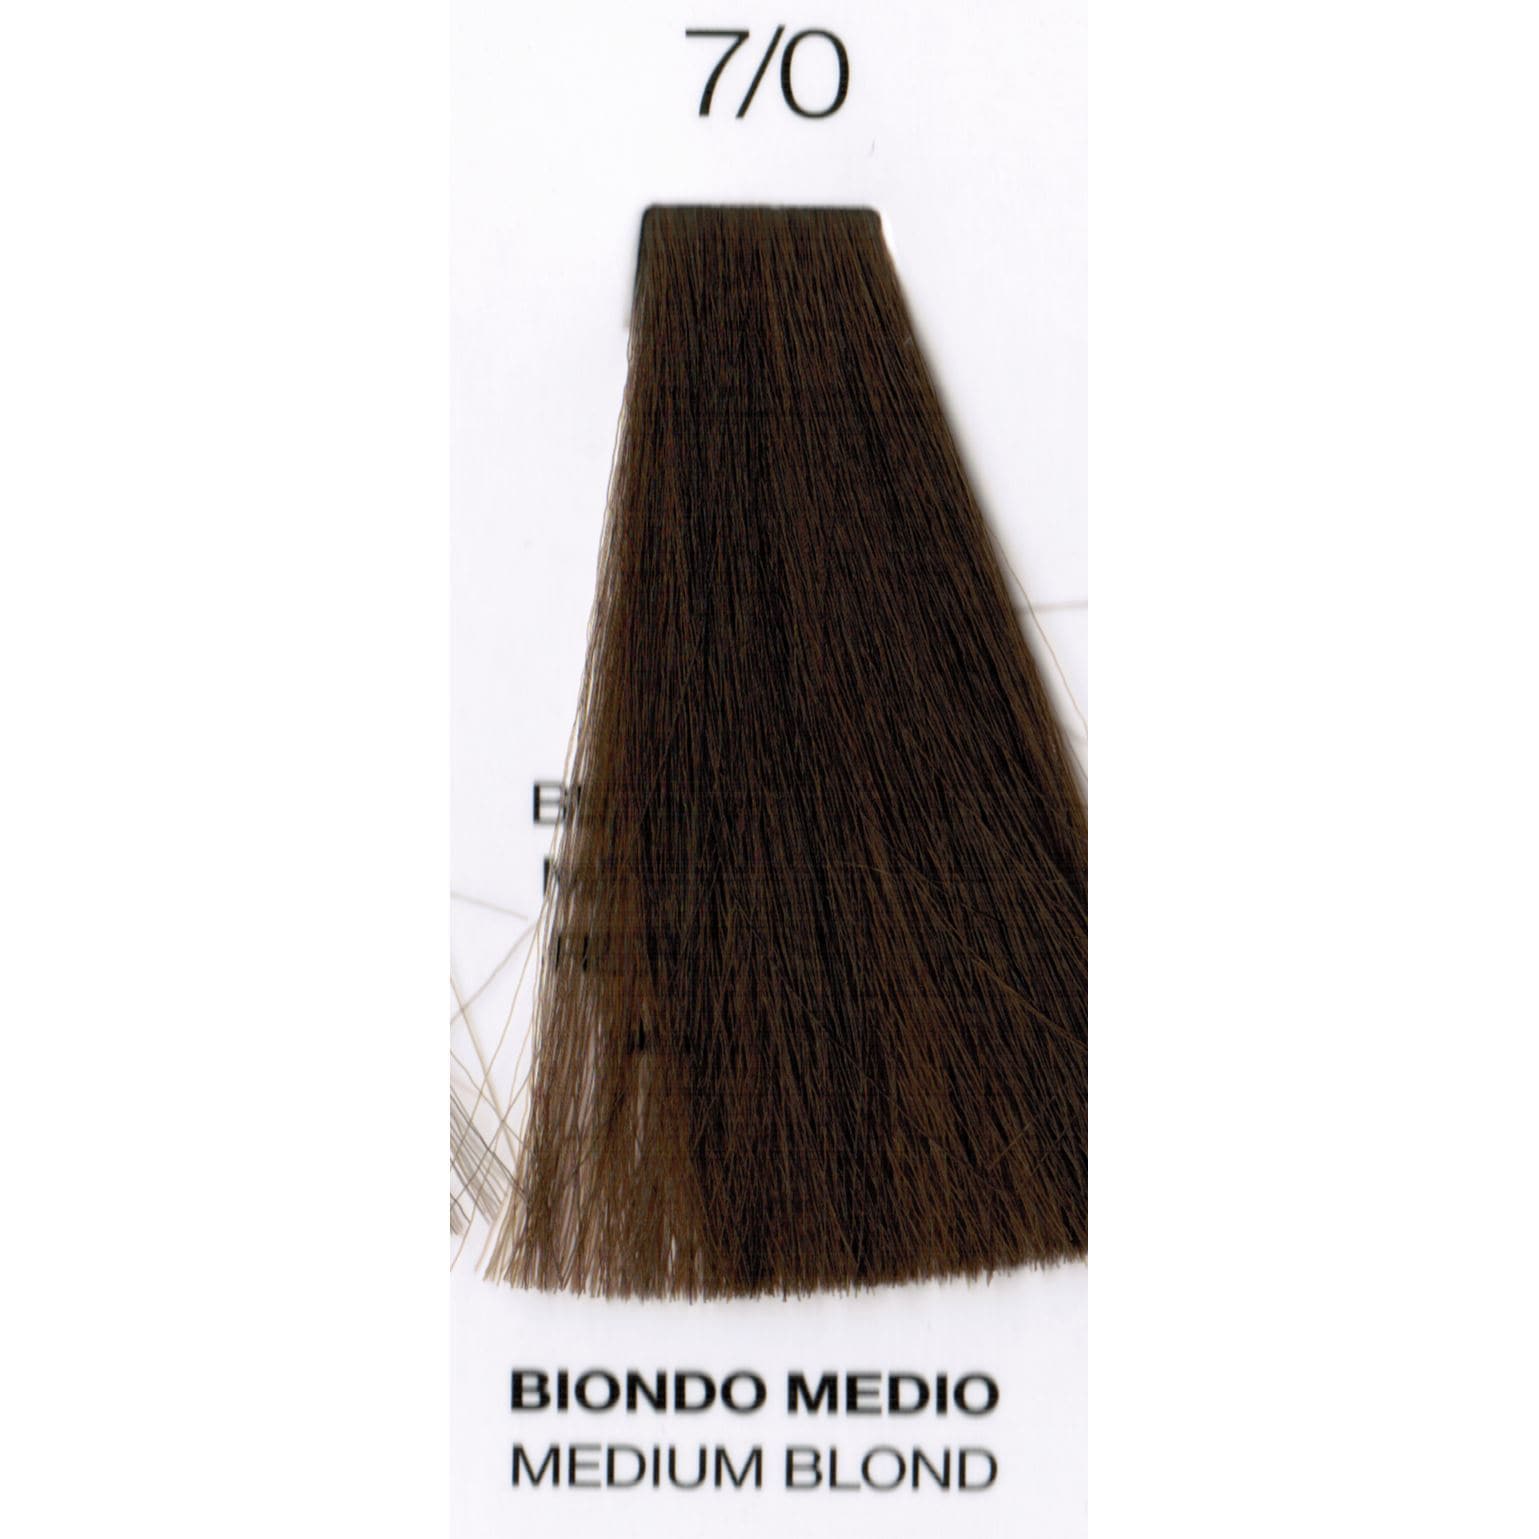 7/0 Medium Blond | Purity | Ammonia-Free Permanent Hair Color HAIR COLOR OYSTER 